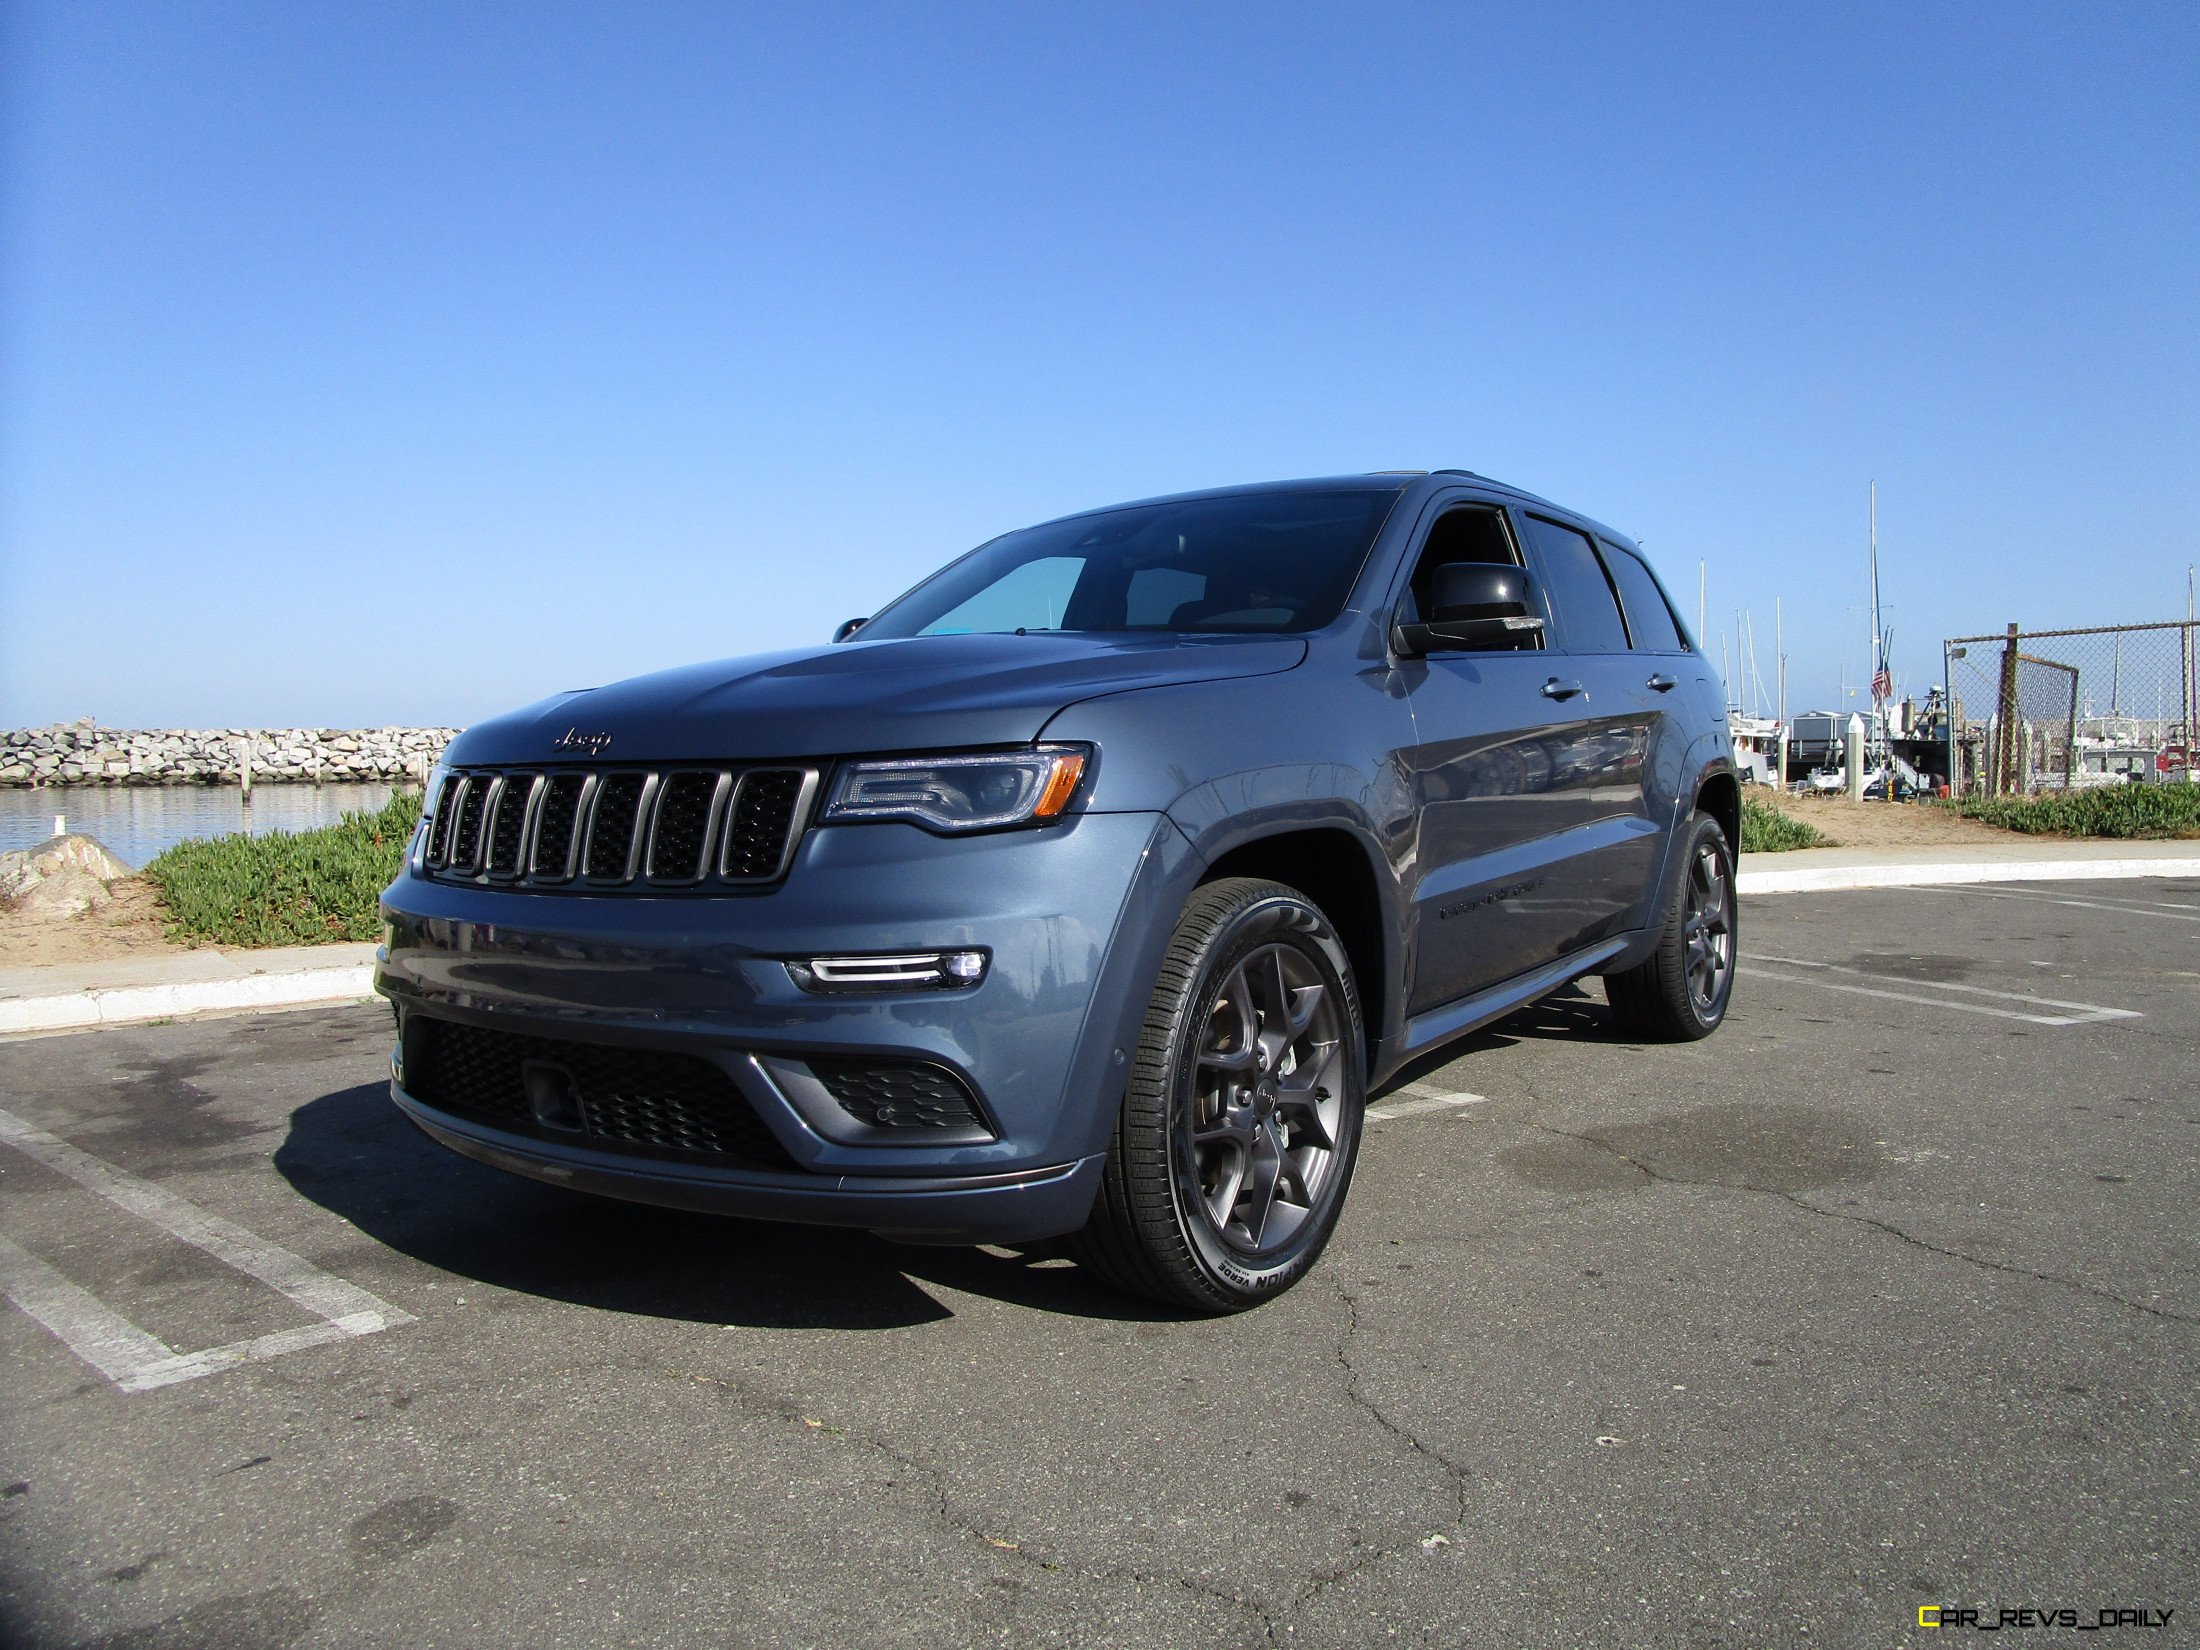 Jeep Grand Cherokee Limited X 4x4 By Ben Lewis Road Test Reviews Car Revs Daily Com